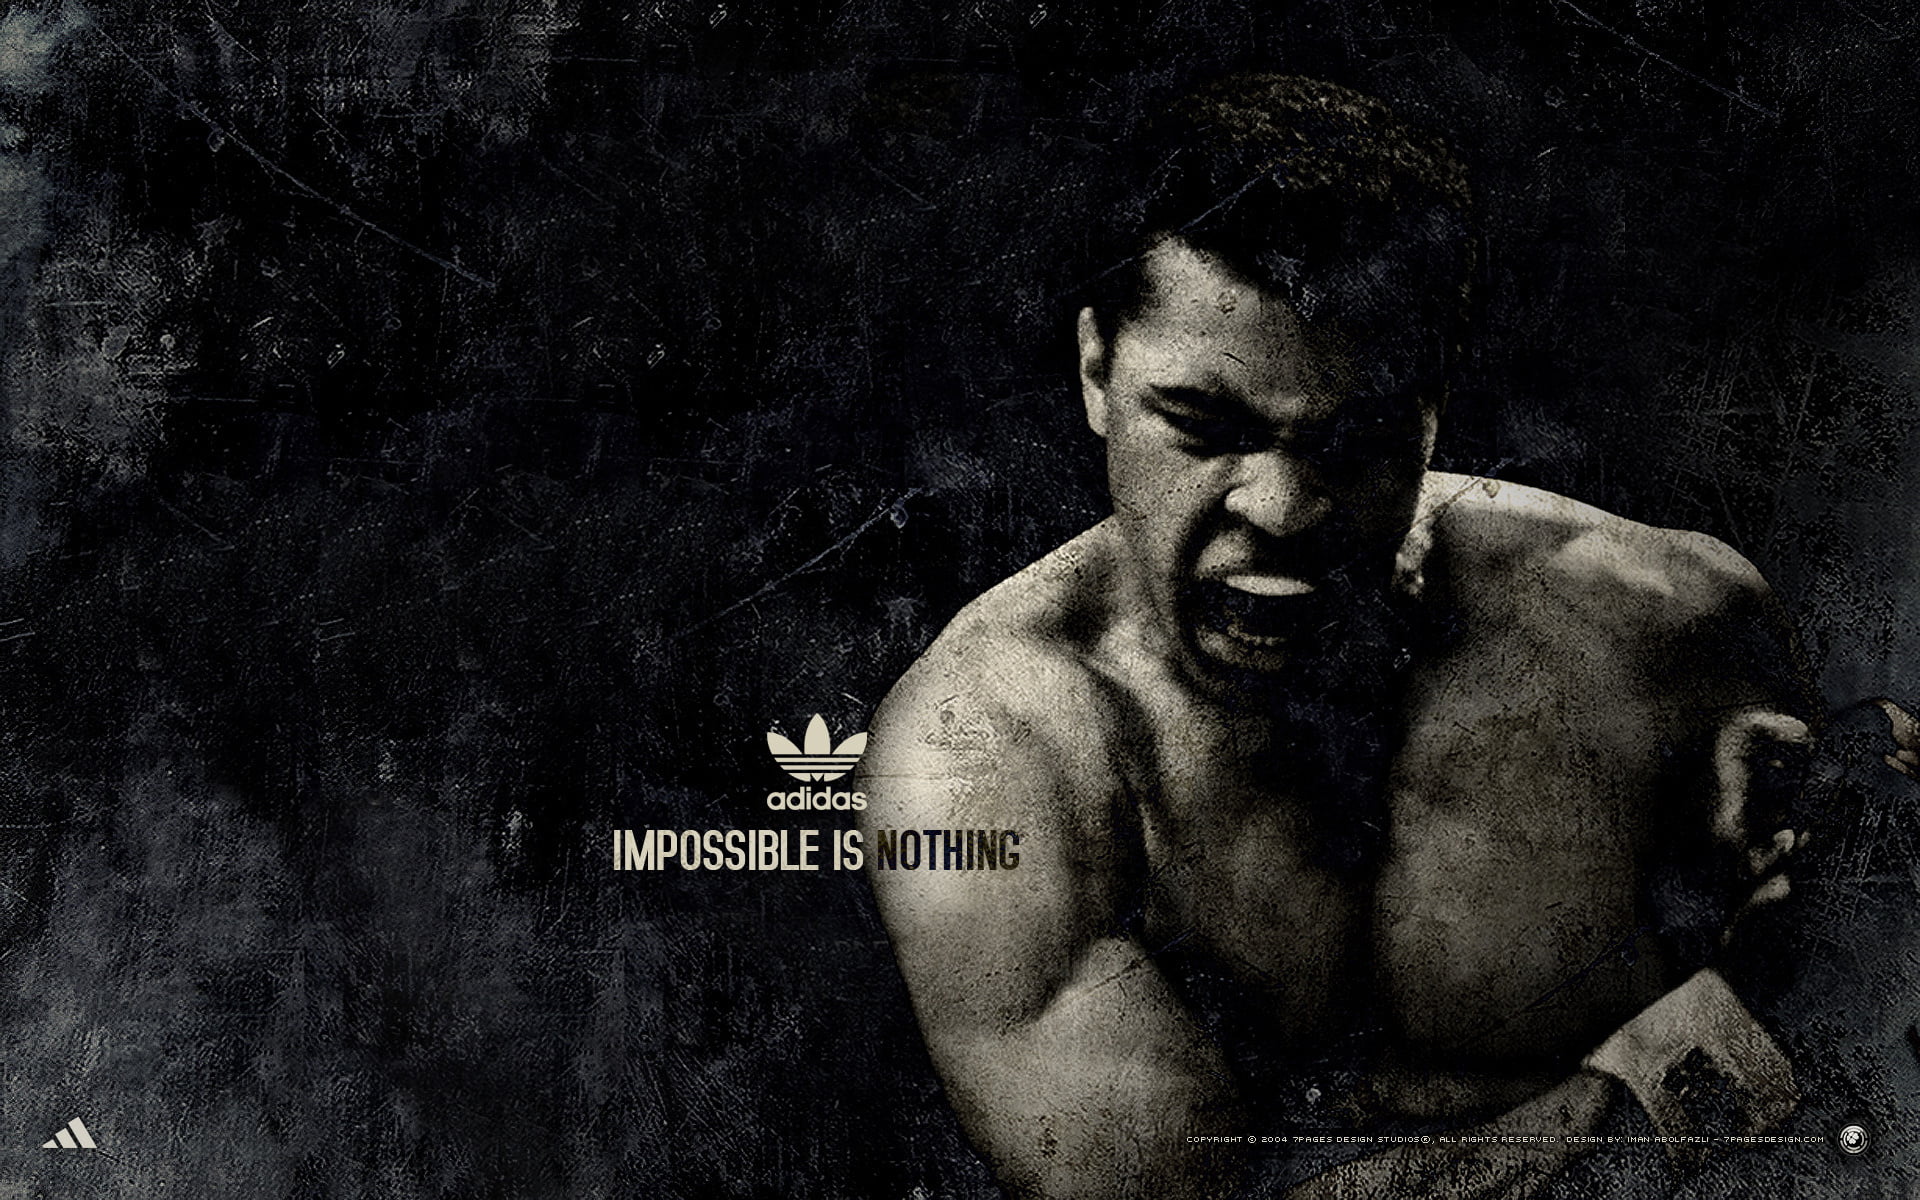 Adidas Impossible is Nothing ads HD wallpaper | Wallpaper ...